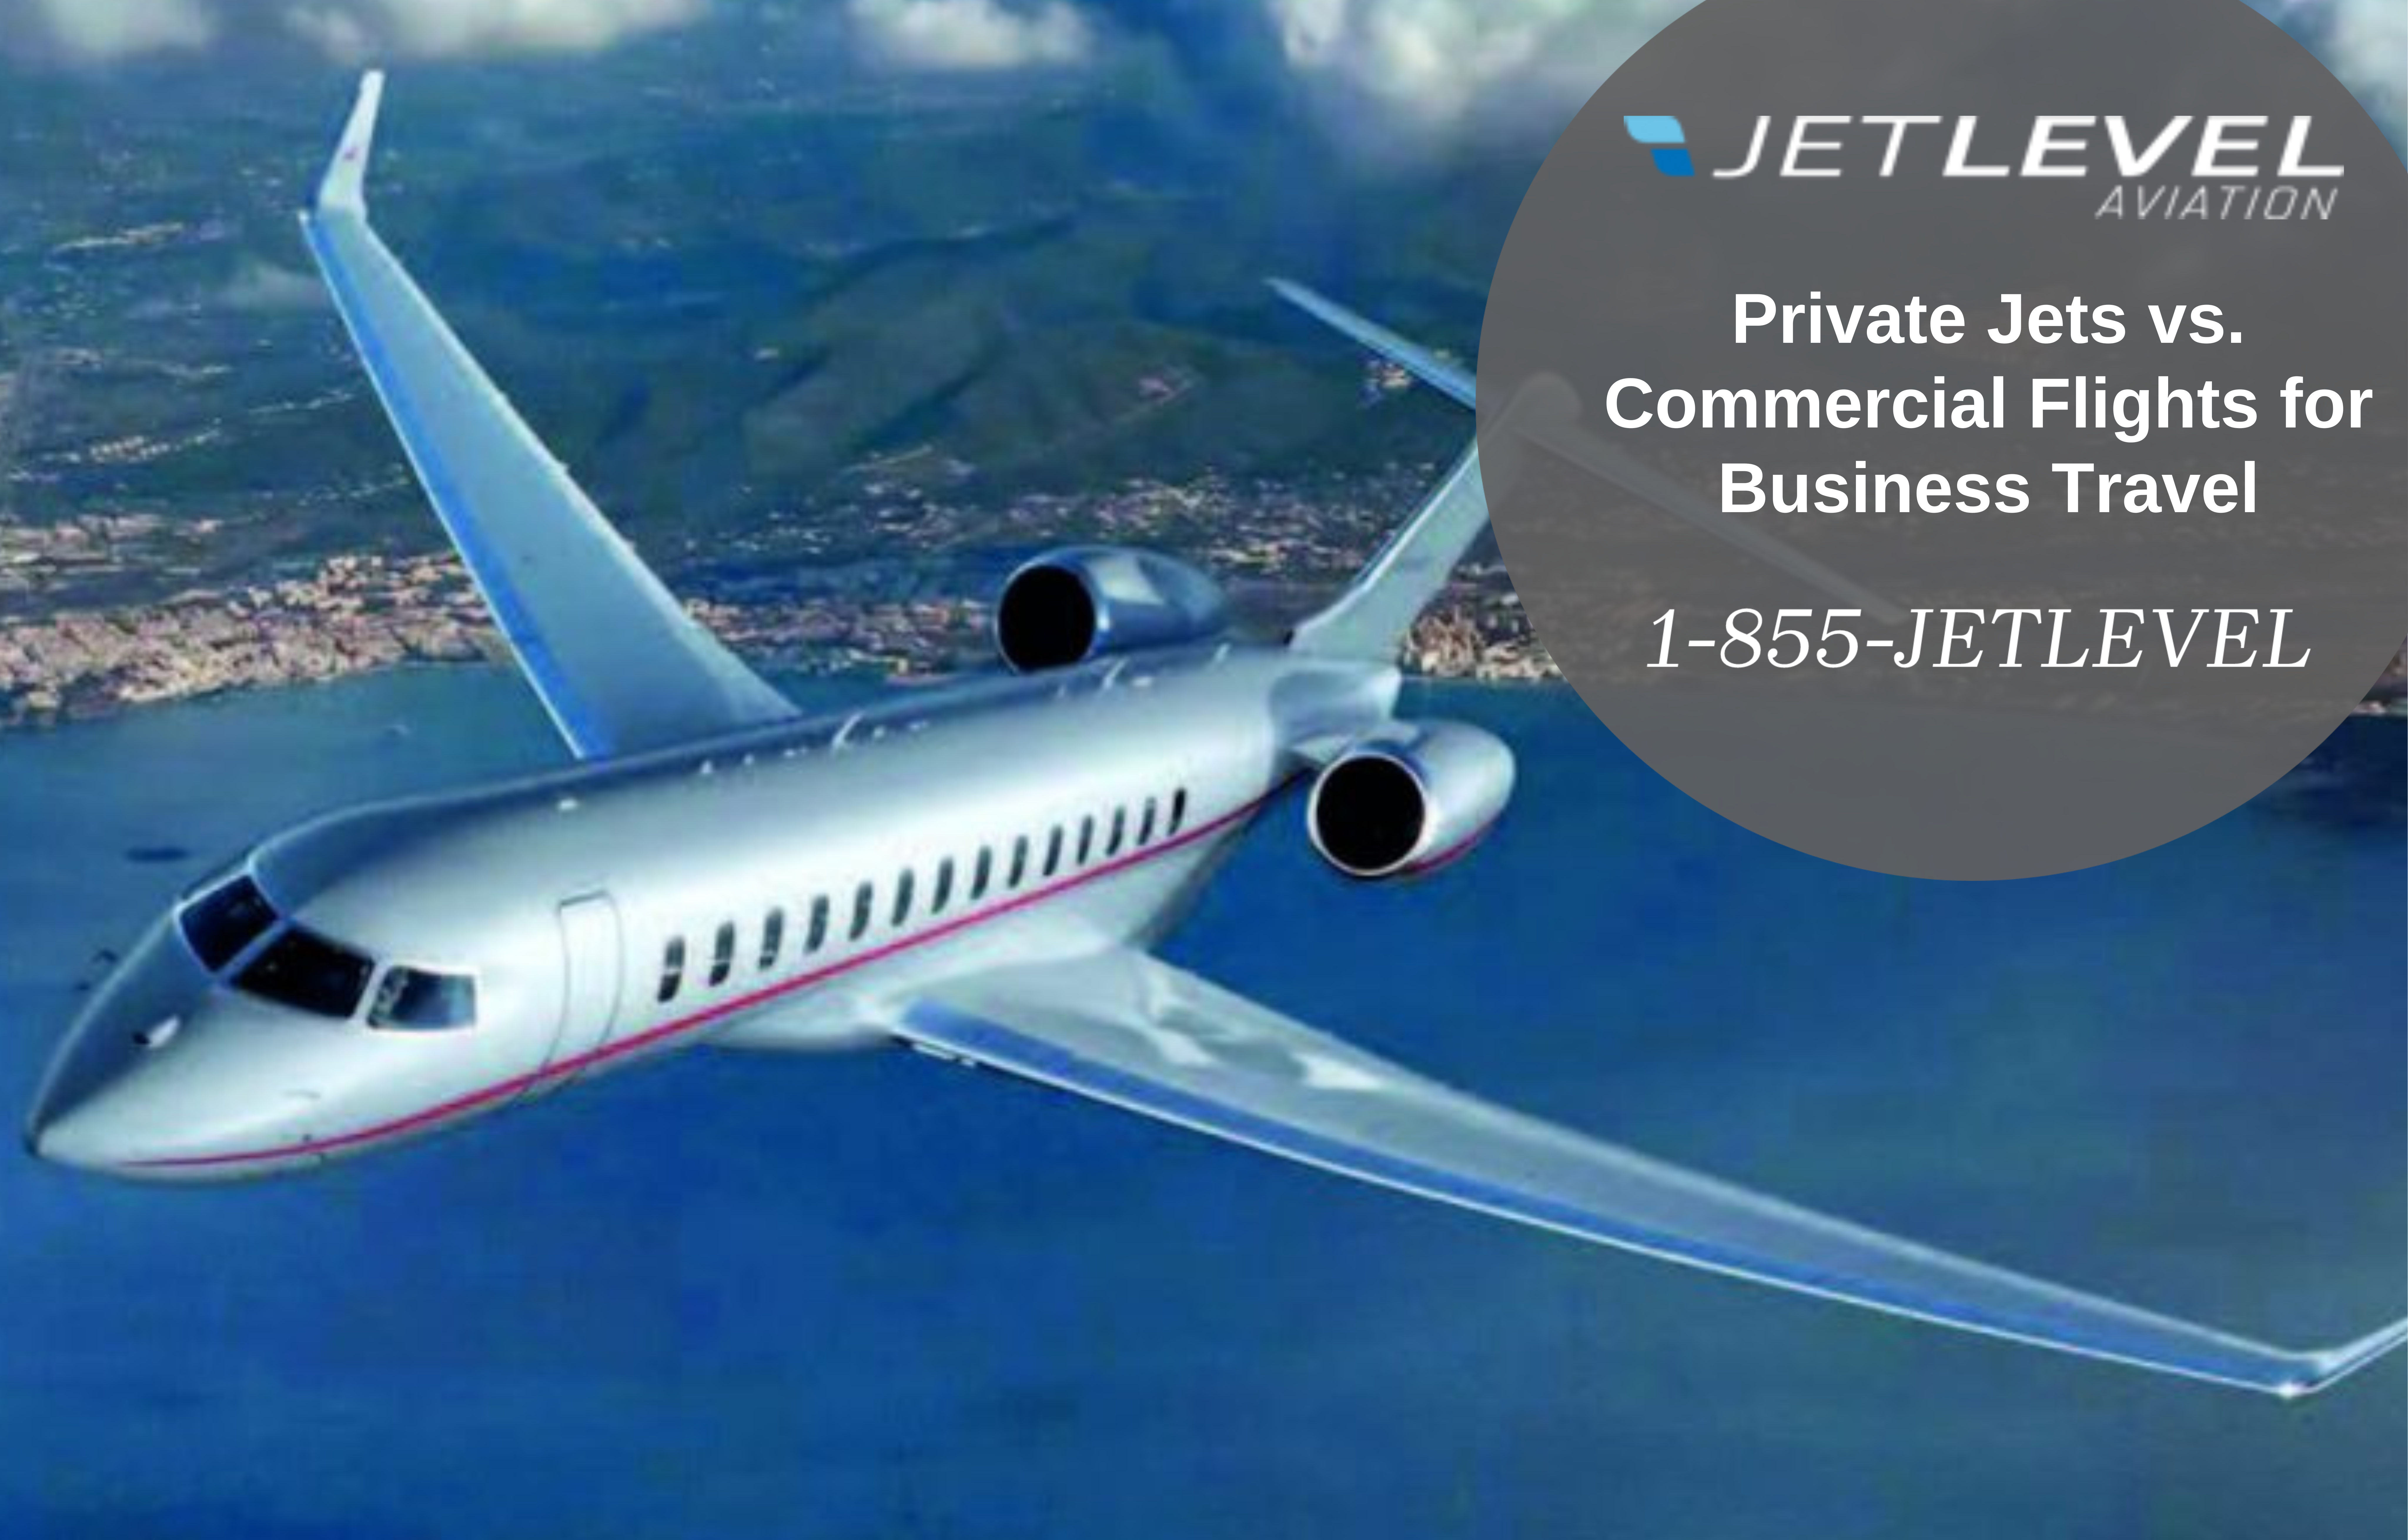 Private Jets vs. Commercial Flights for Business Travel